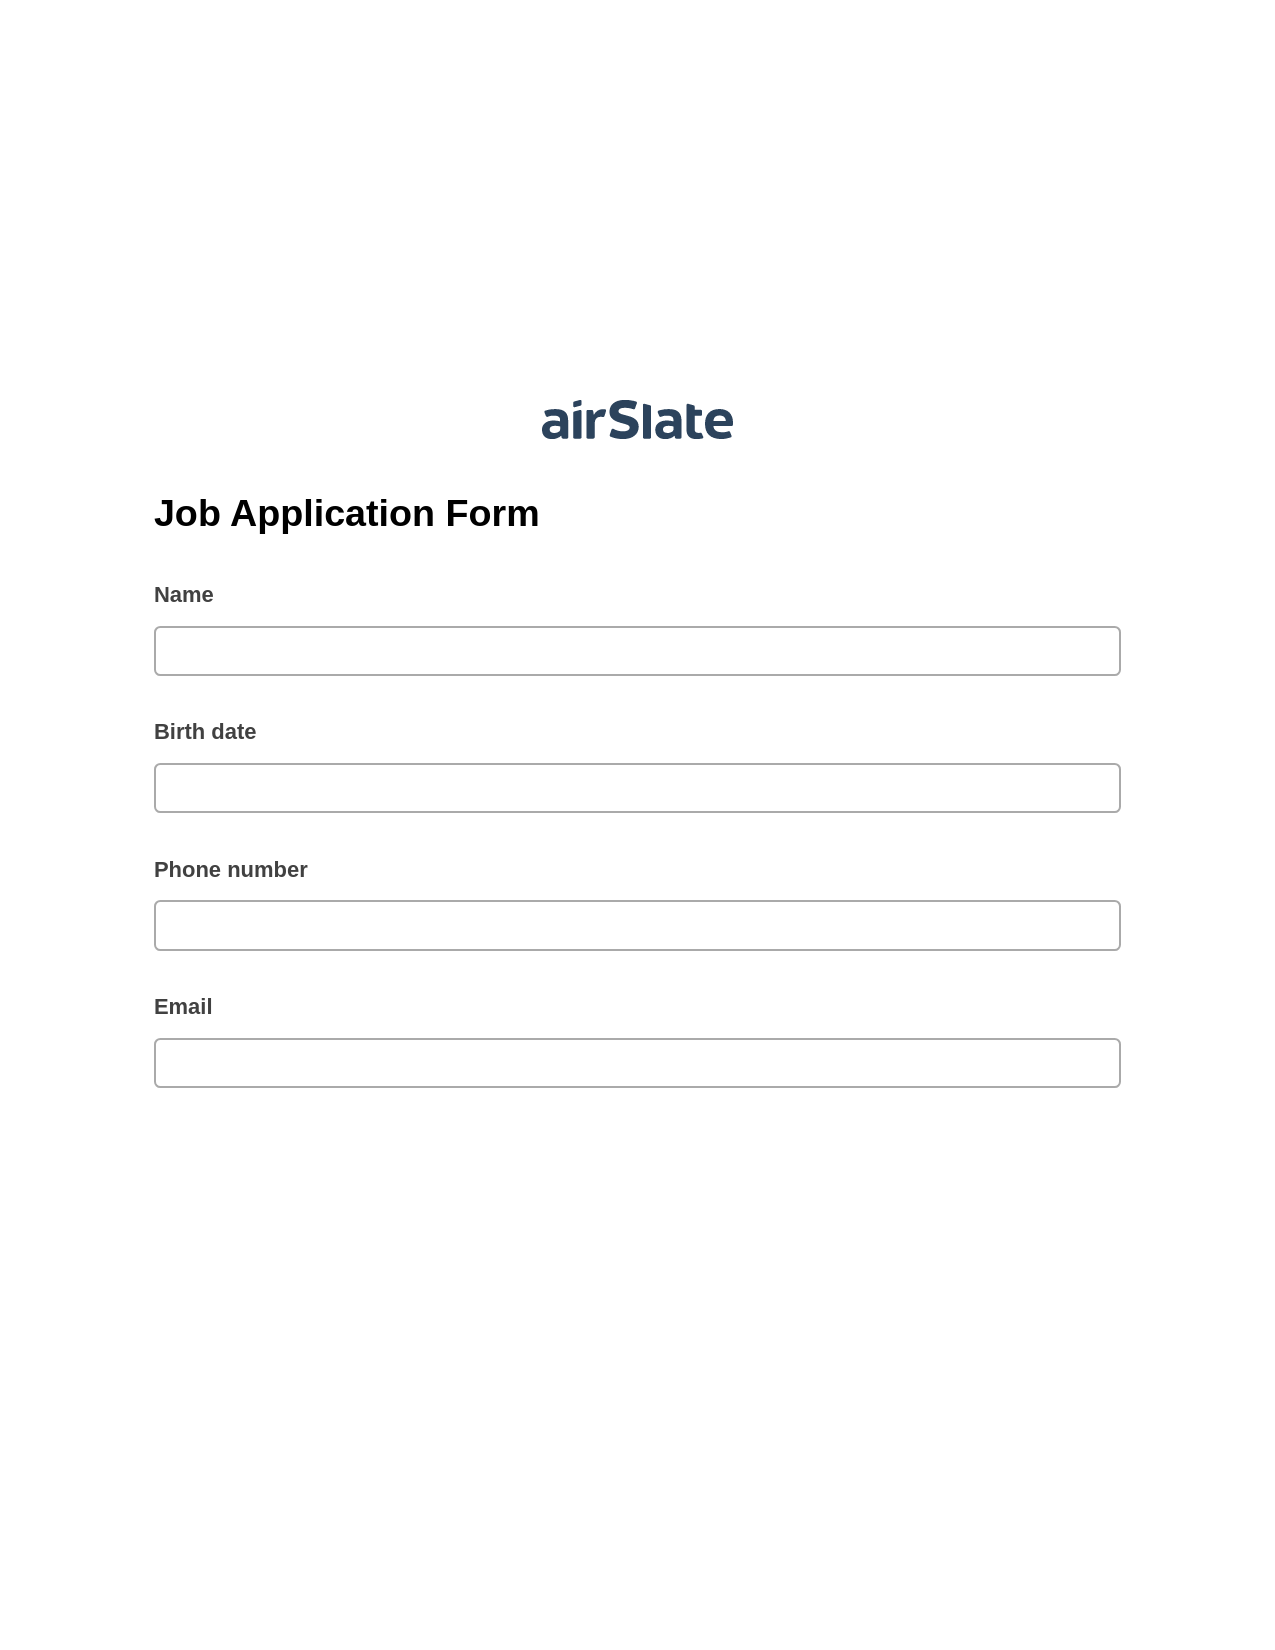 Multirole Job Application Form Pre-fill from Google Sheet Dropdown Options Bot, Email Notification Bot, Export to MySQL Bot